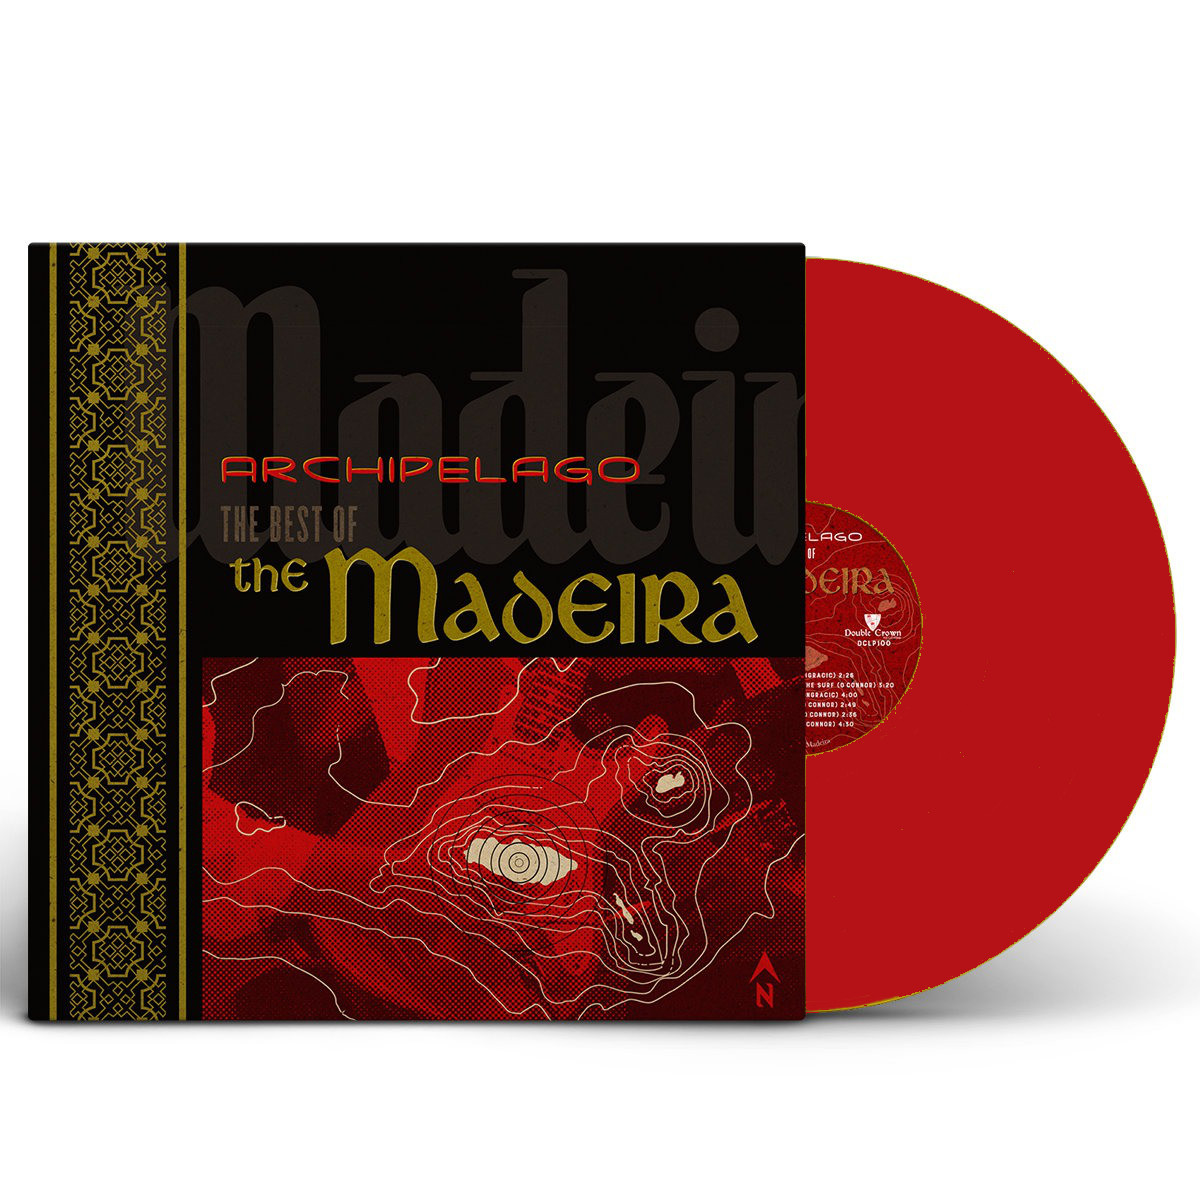 The Madeira - Archipelago: The Best Of The Madeira Vinyl LP Deluxe Package  (Double Crown)